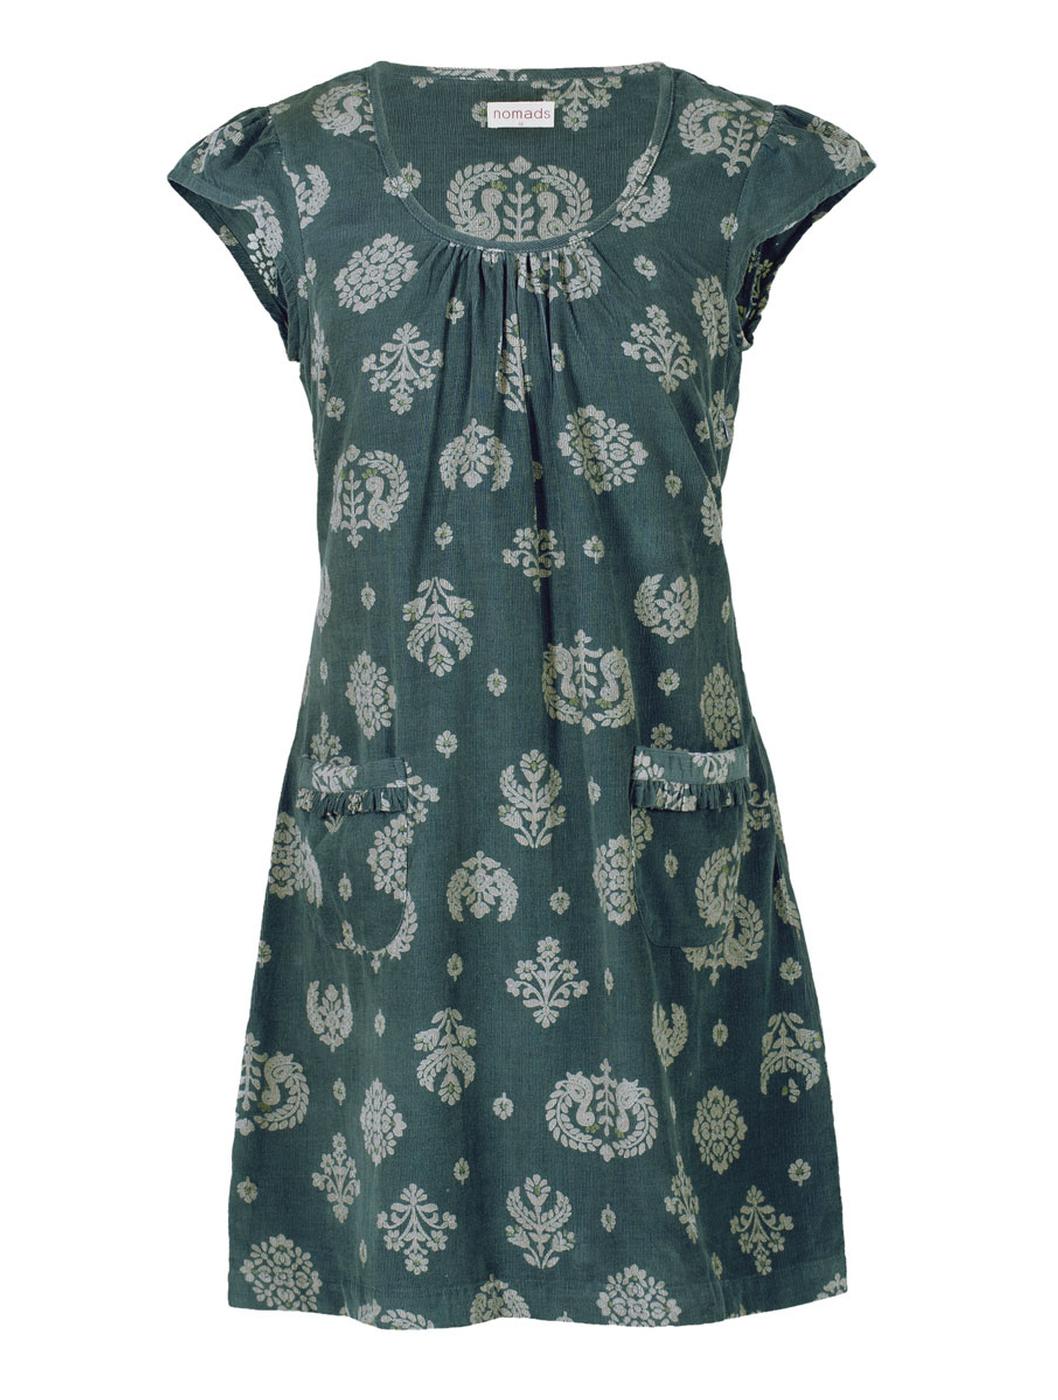 NOMADS Retro 1960s Cord Pinafore Dress in Green Print